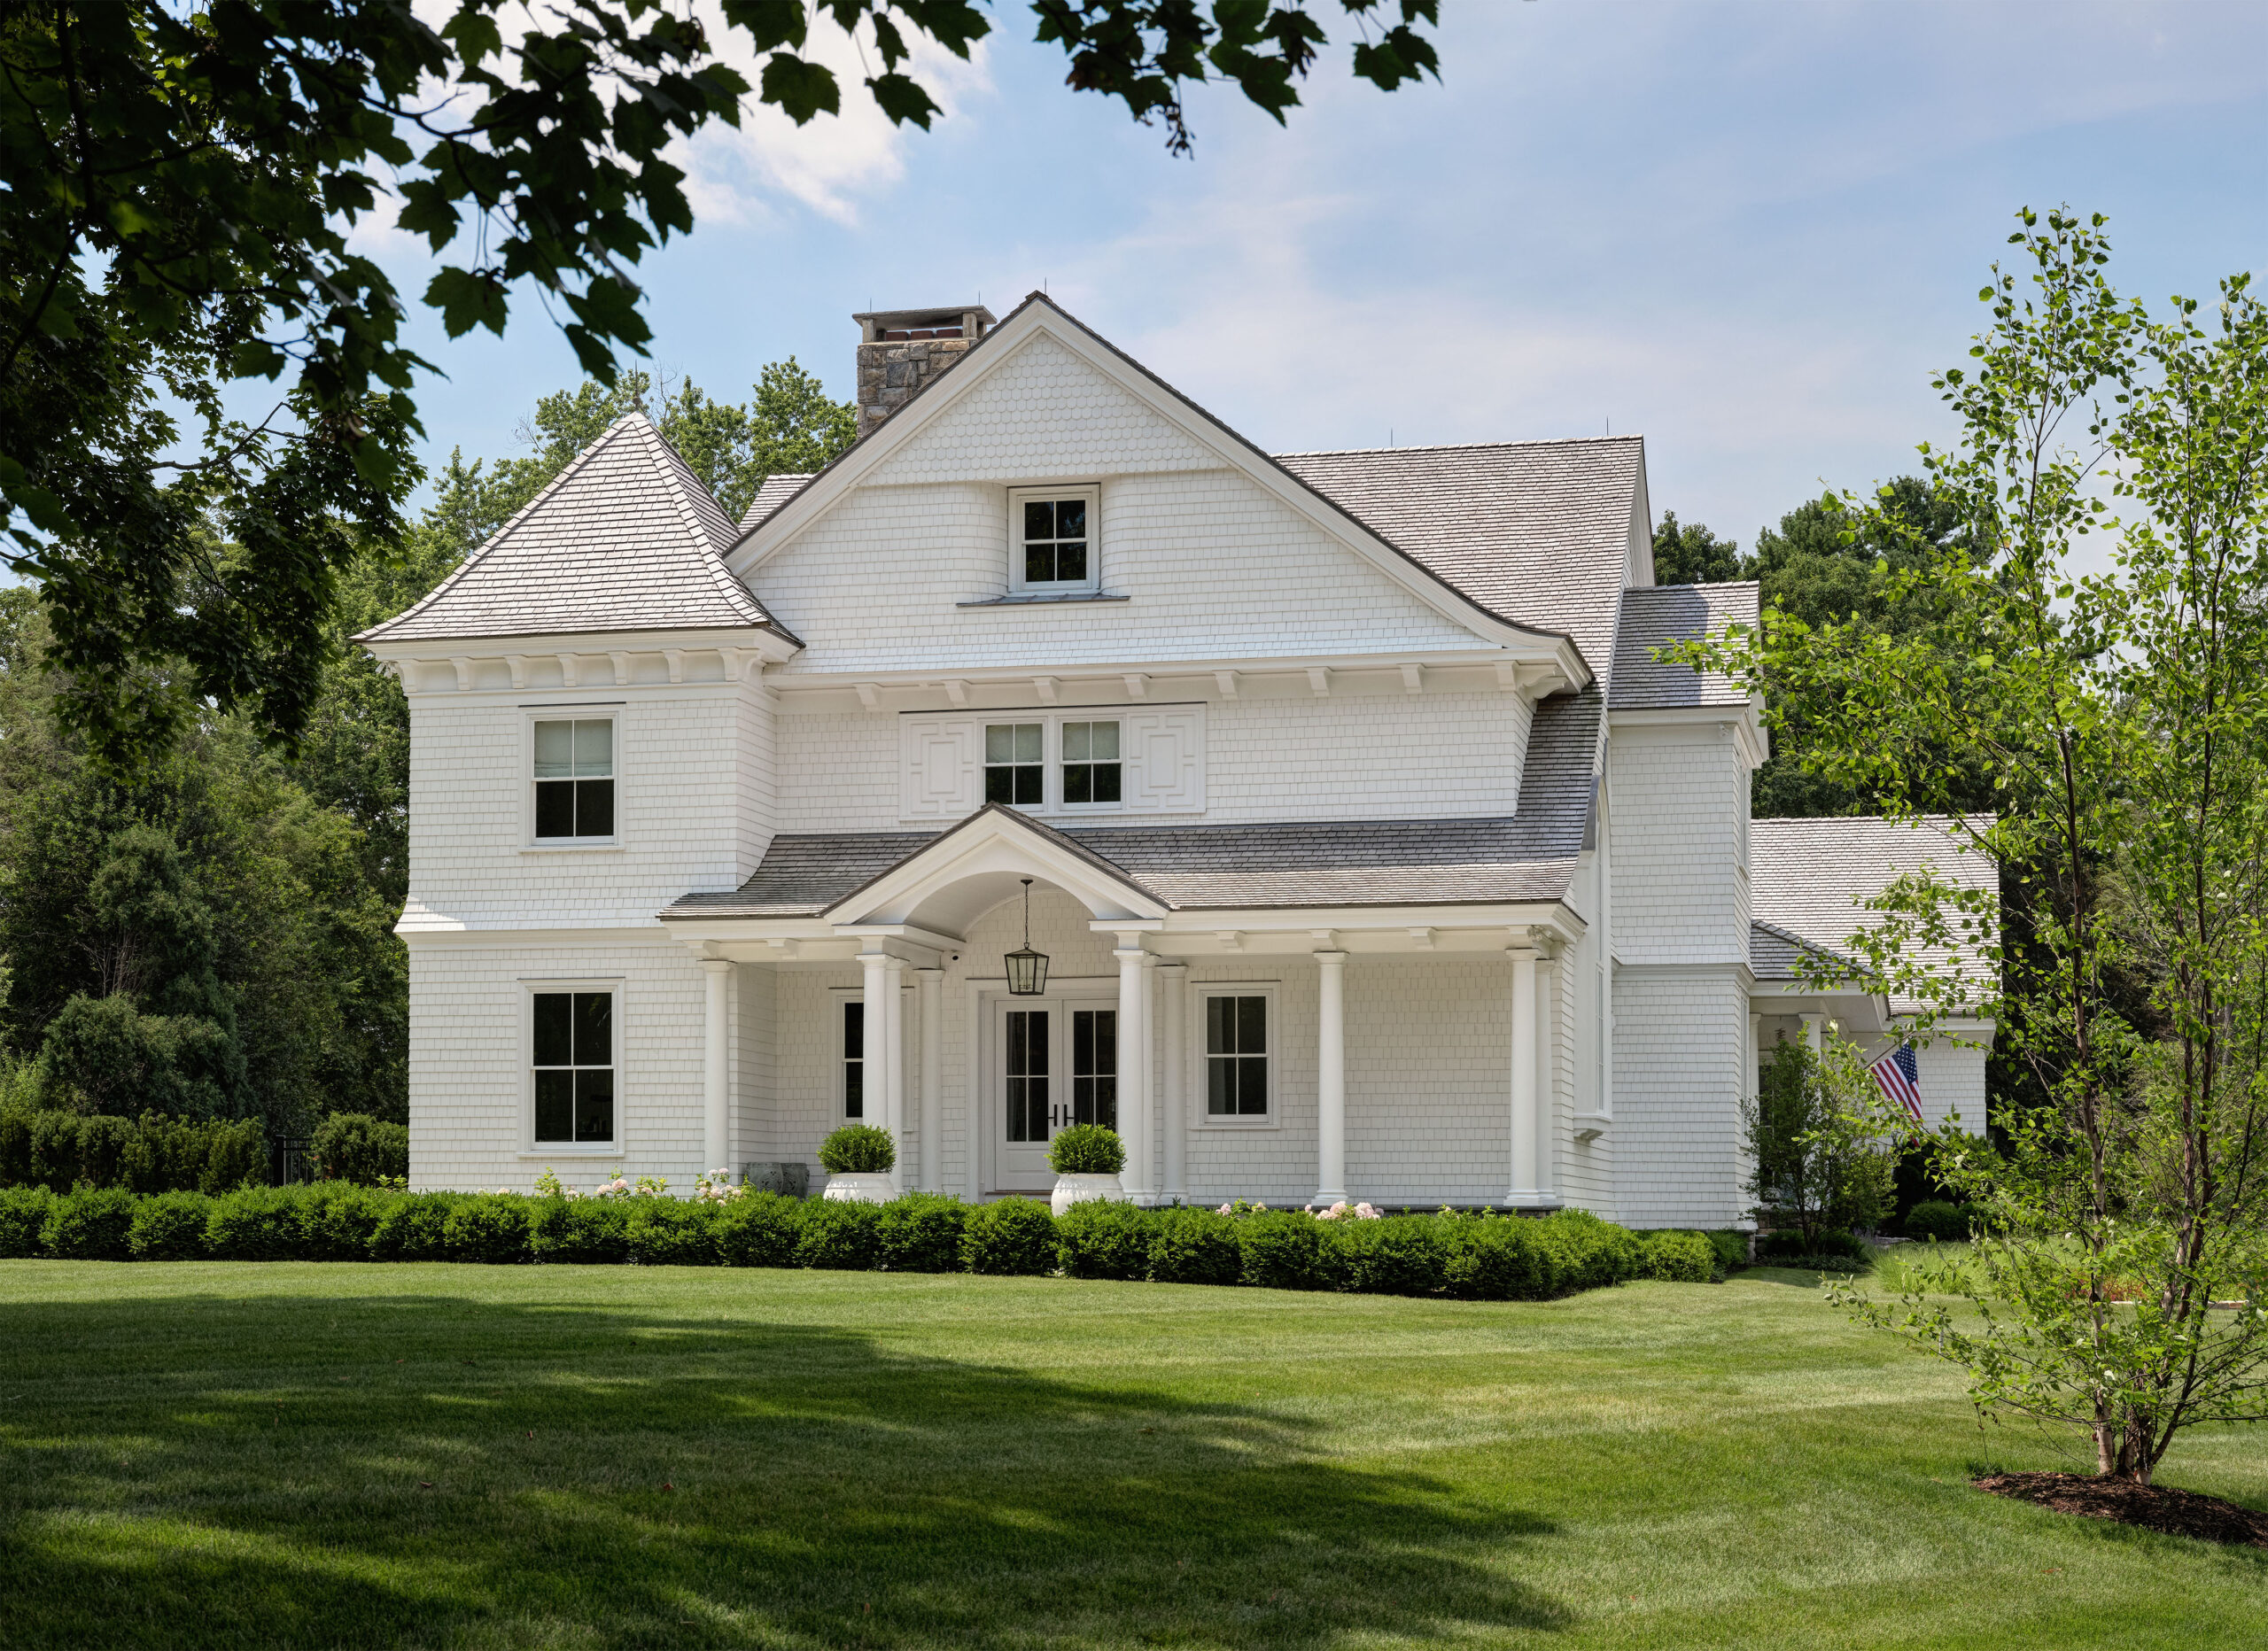 Prominent Shingle Style Home